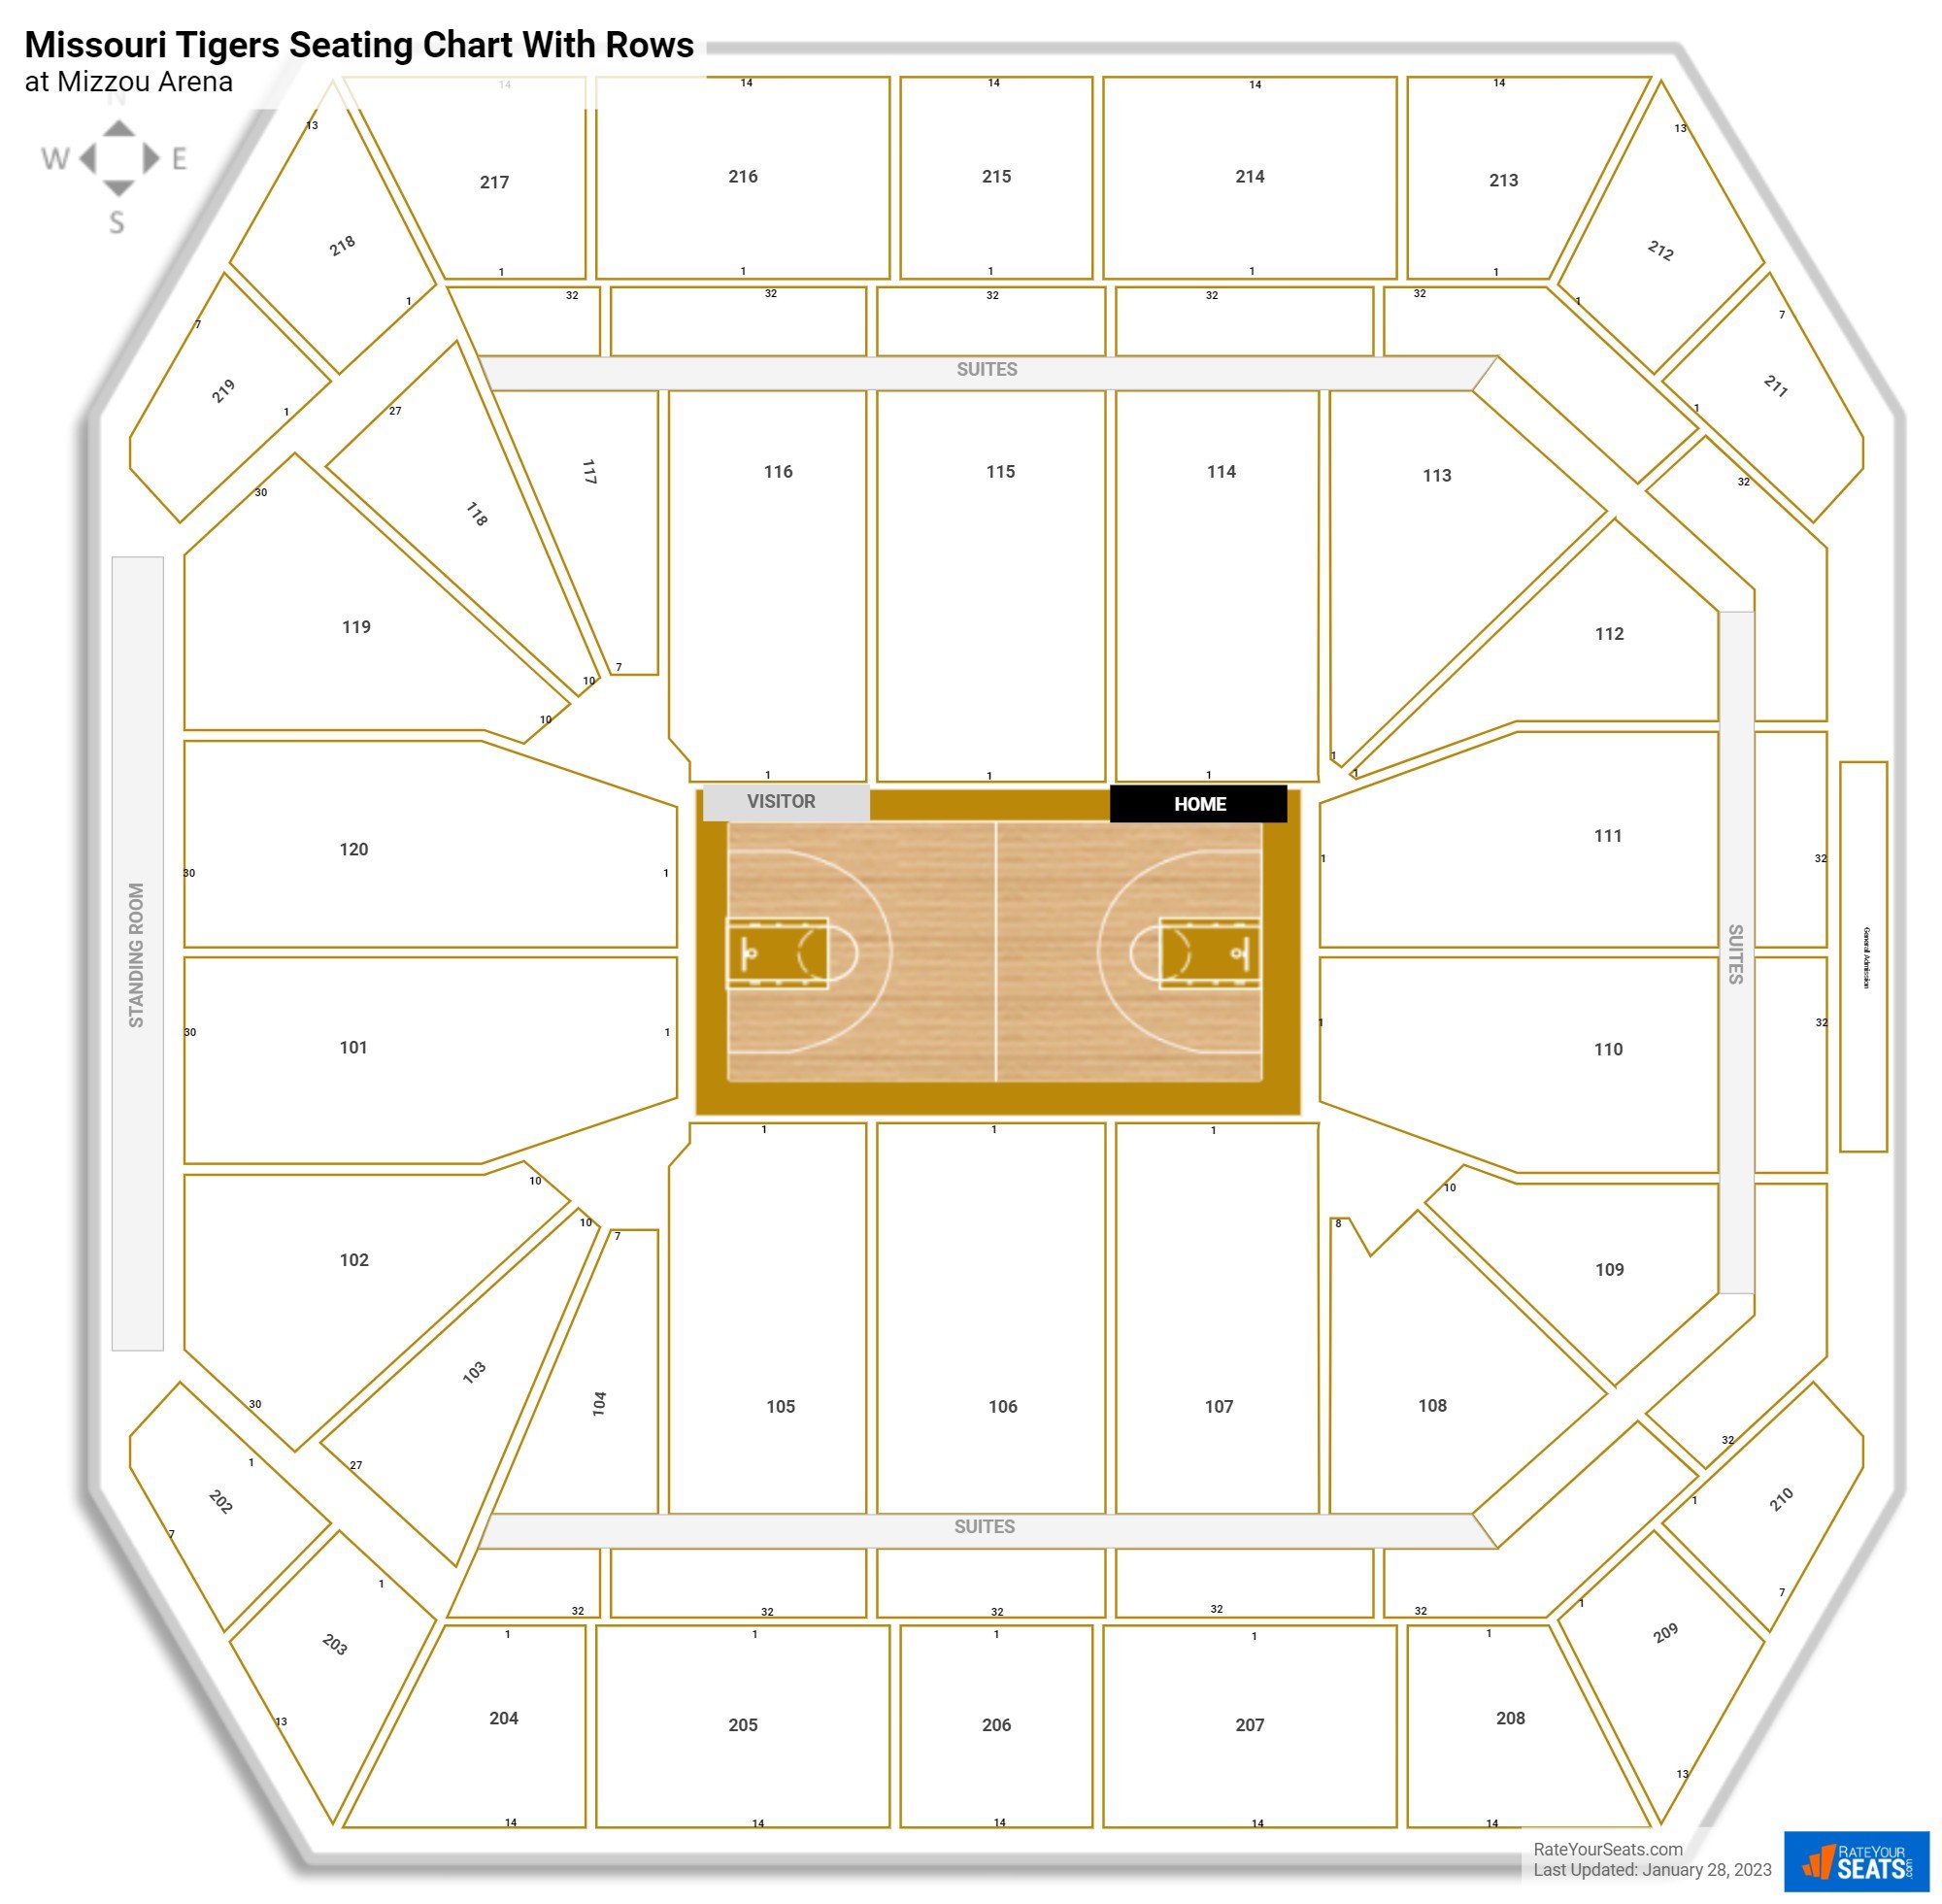 Mizzou Arena seating chart with row numbers